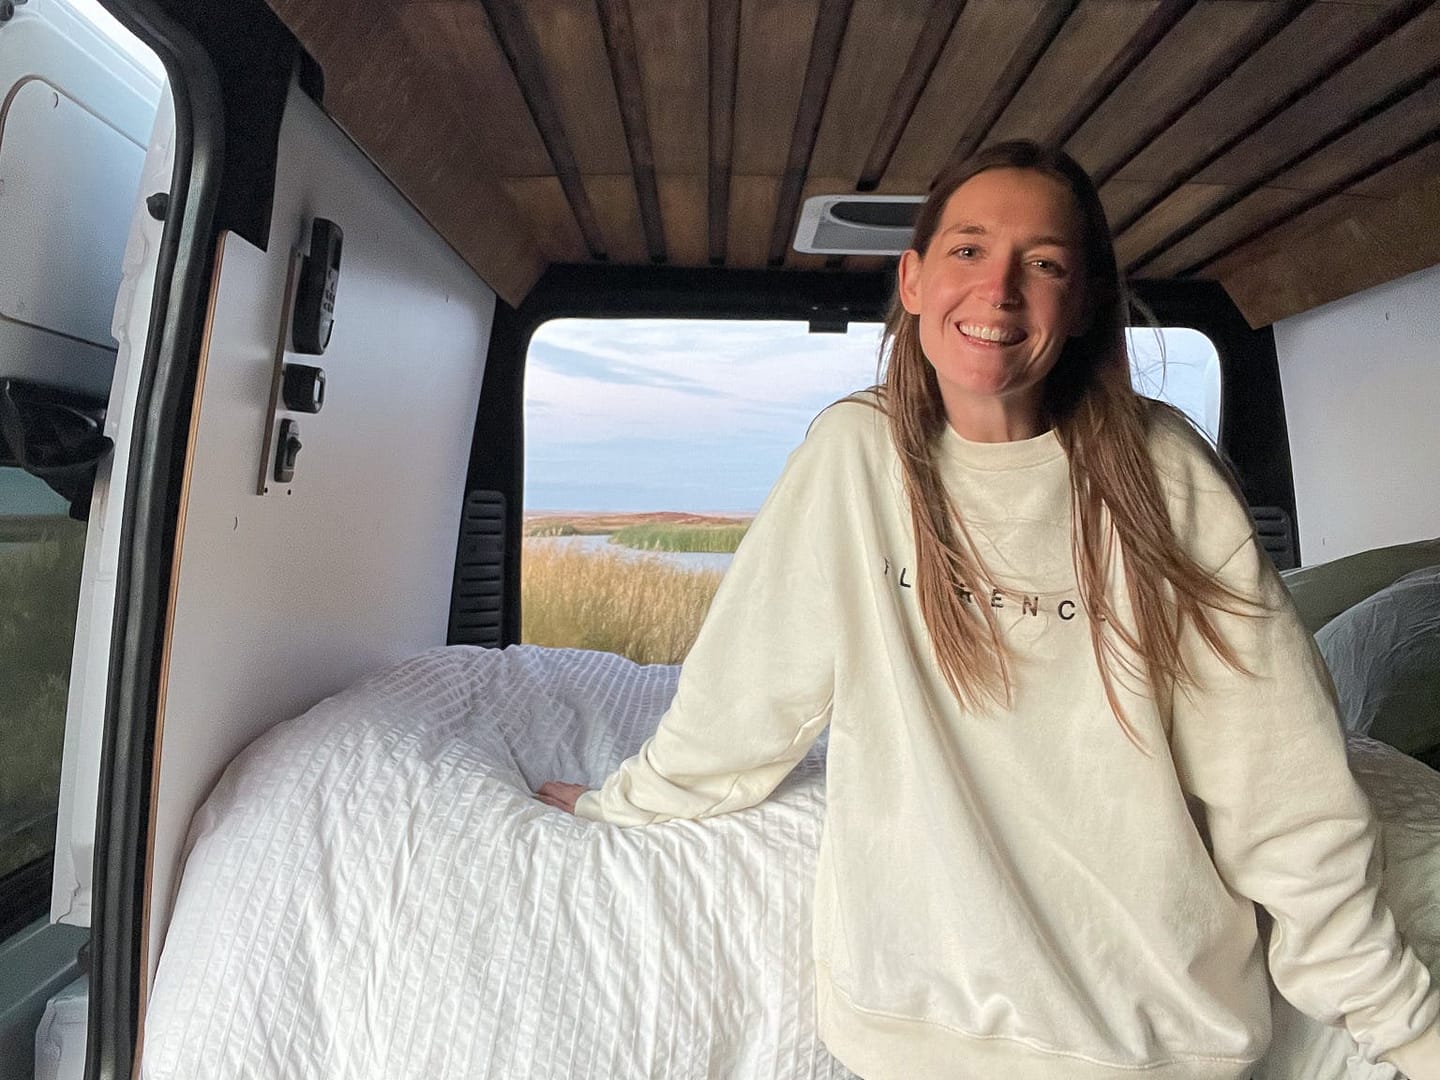 i-spent-$3,200-for-a-2-week-van-trip-it-was-worth-every-penny.